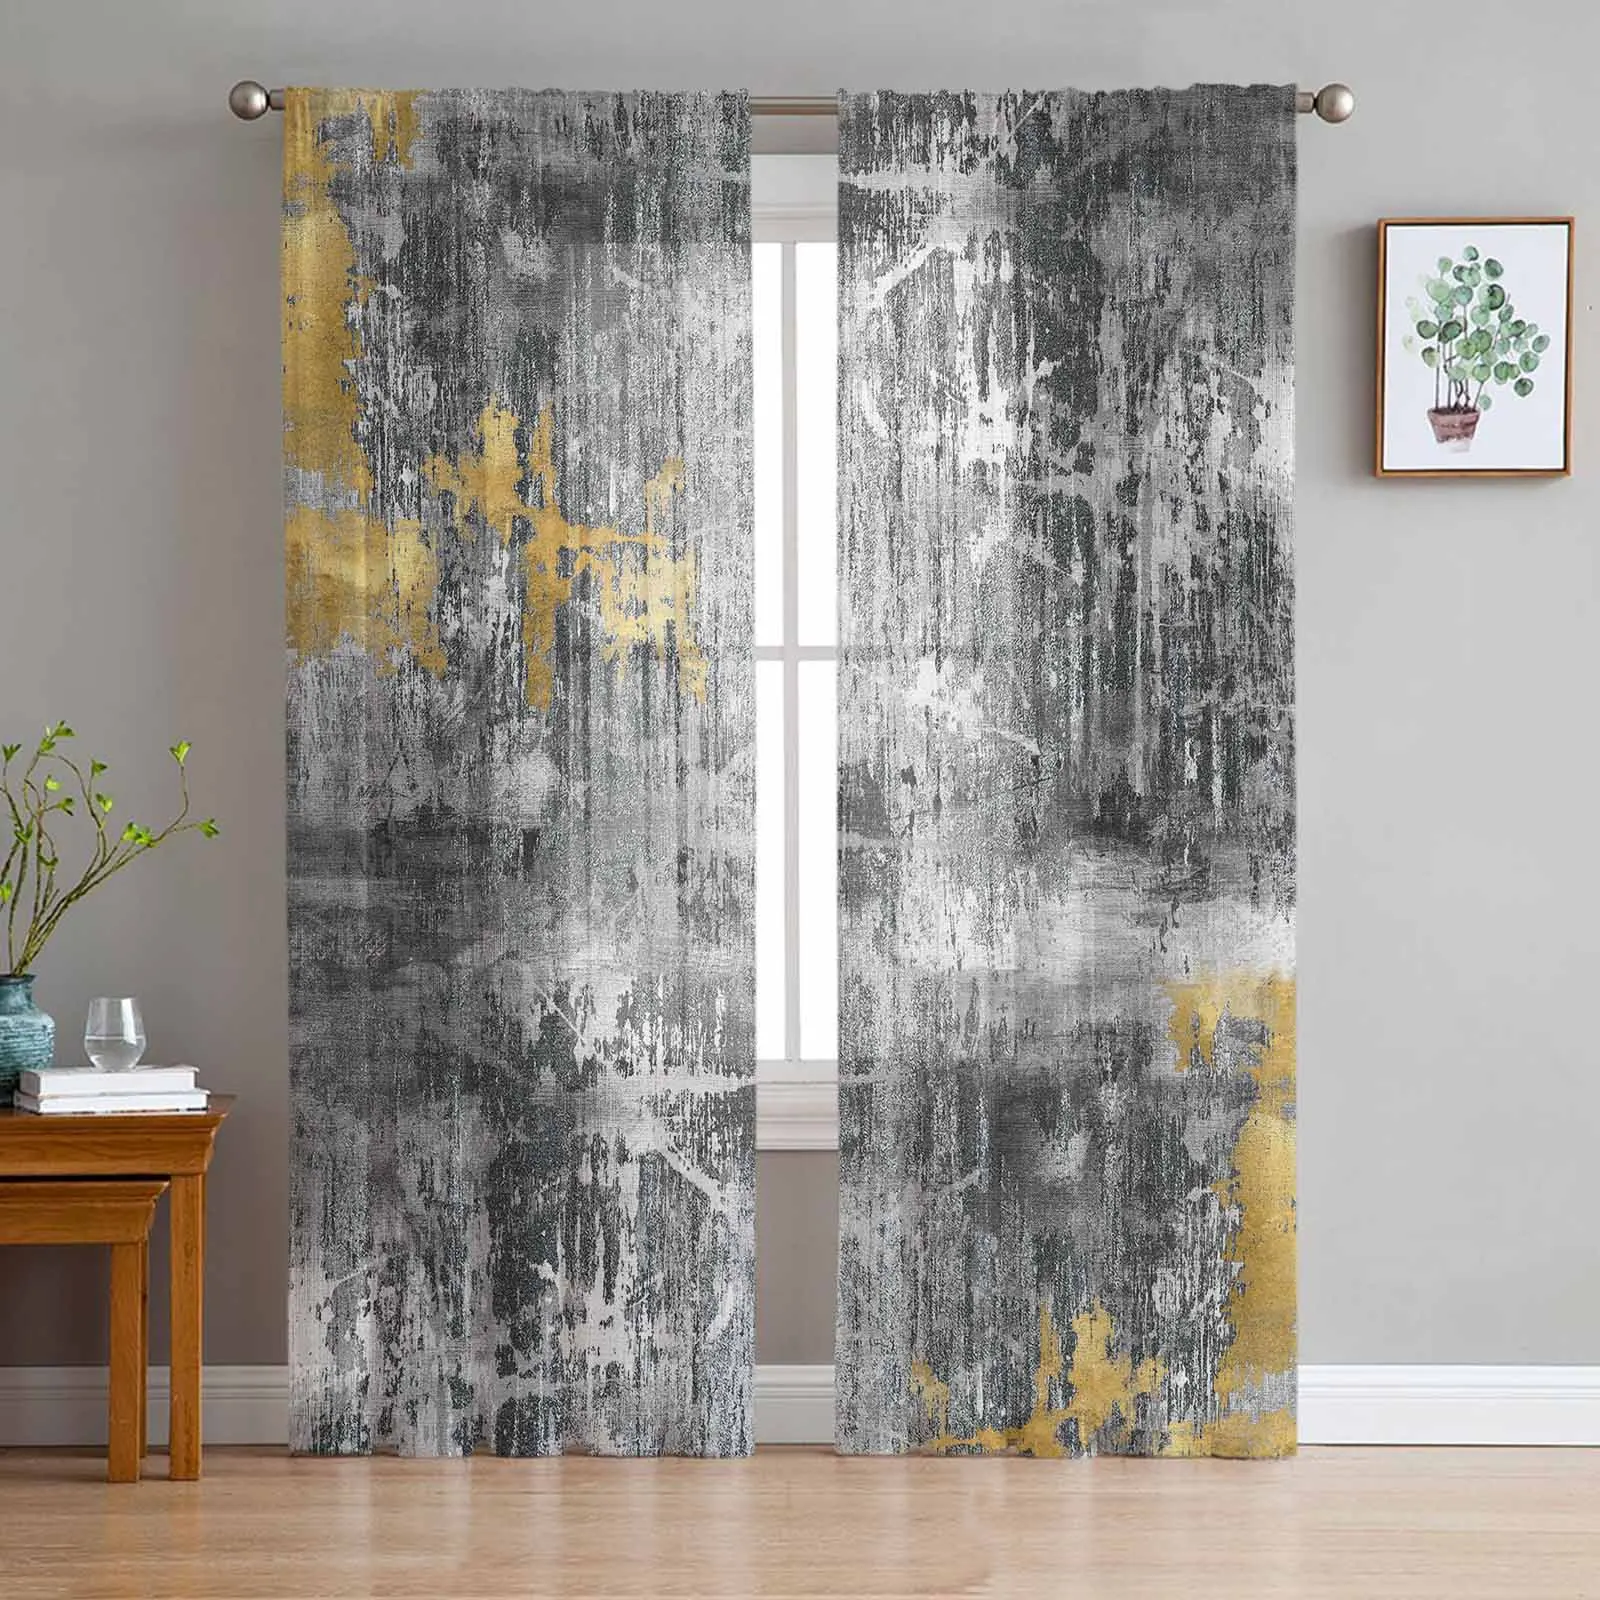 

Abstract Black Texture Distressed Tulle Sheer Curtain Living Room Adults Bedroom Drapes Kitchen Voile Organza Decor Curtains